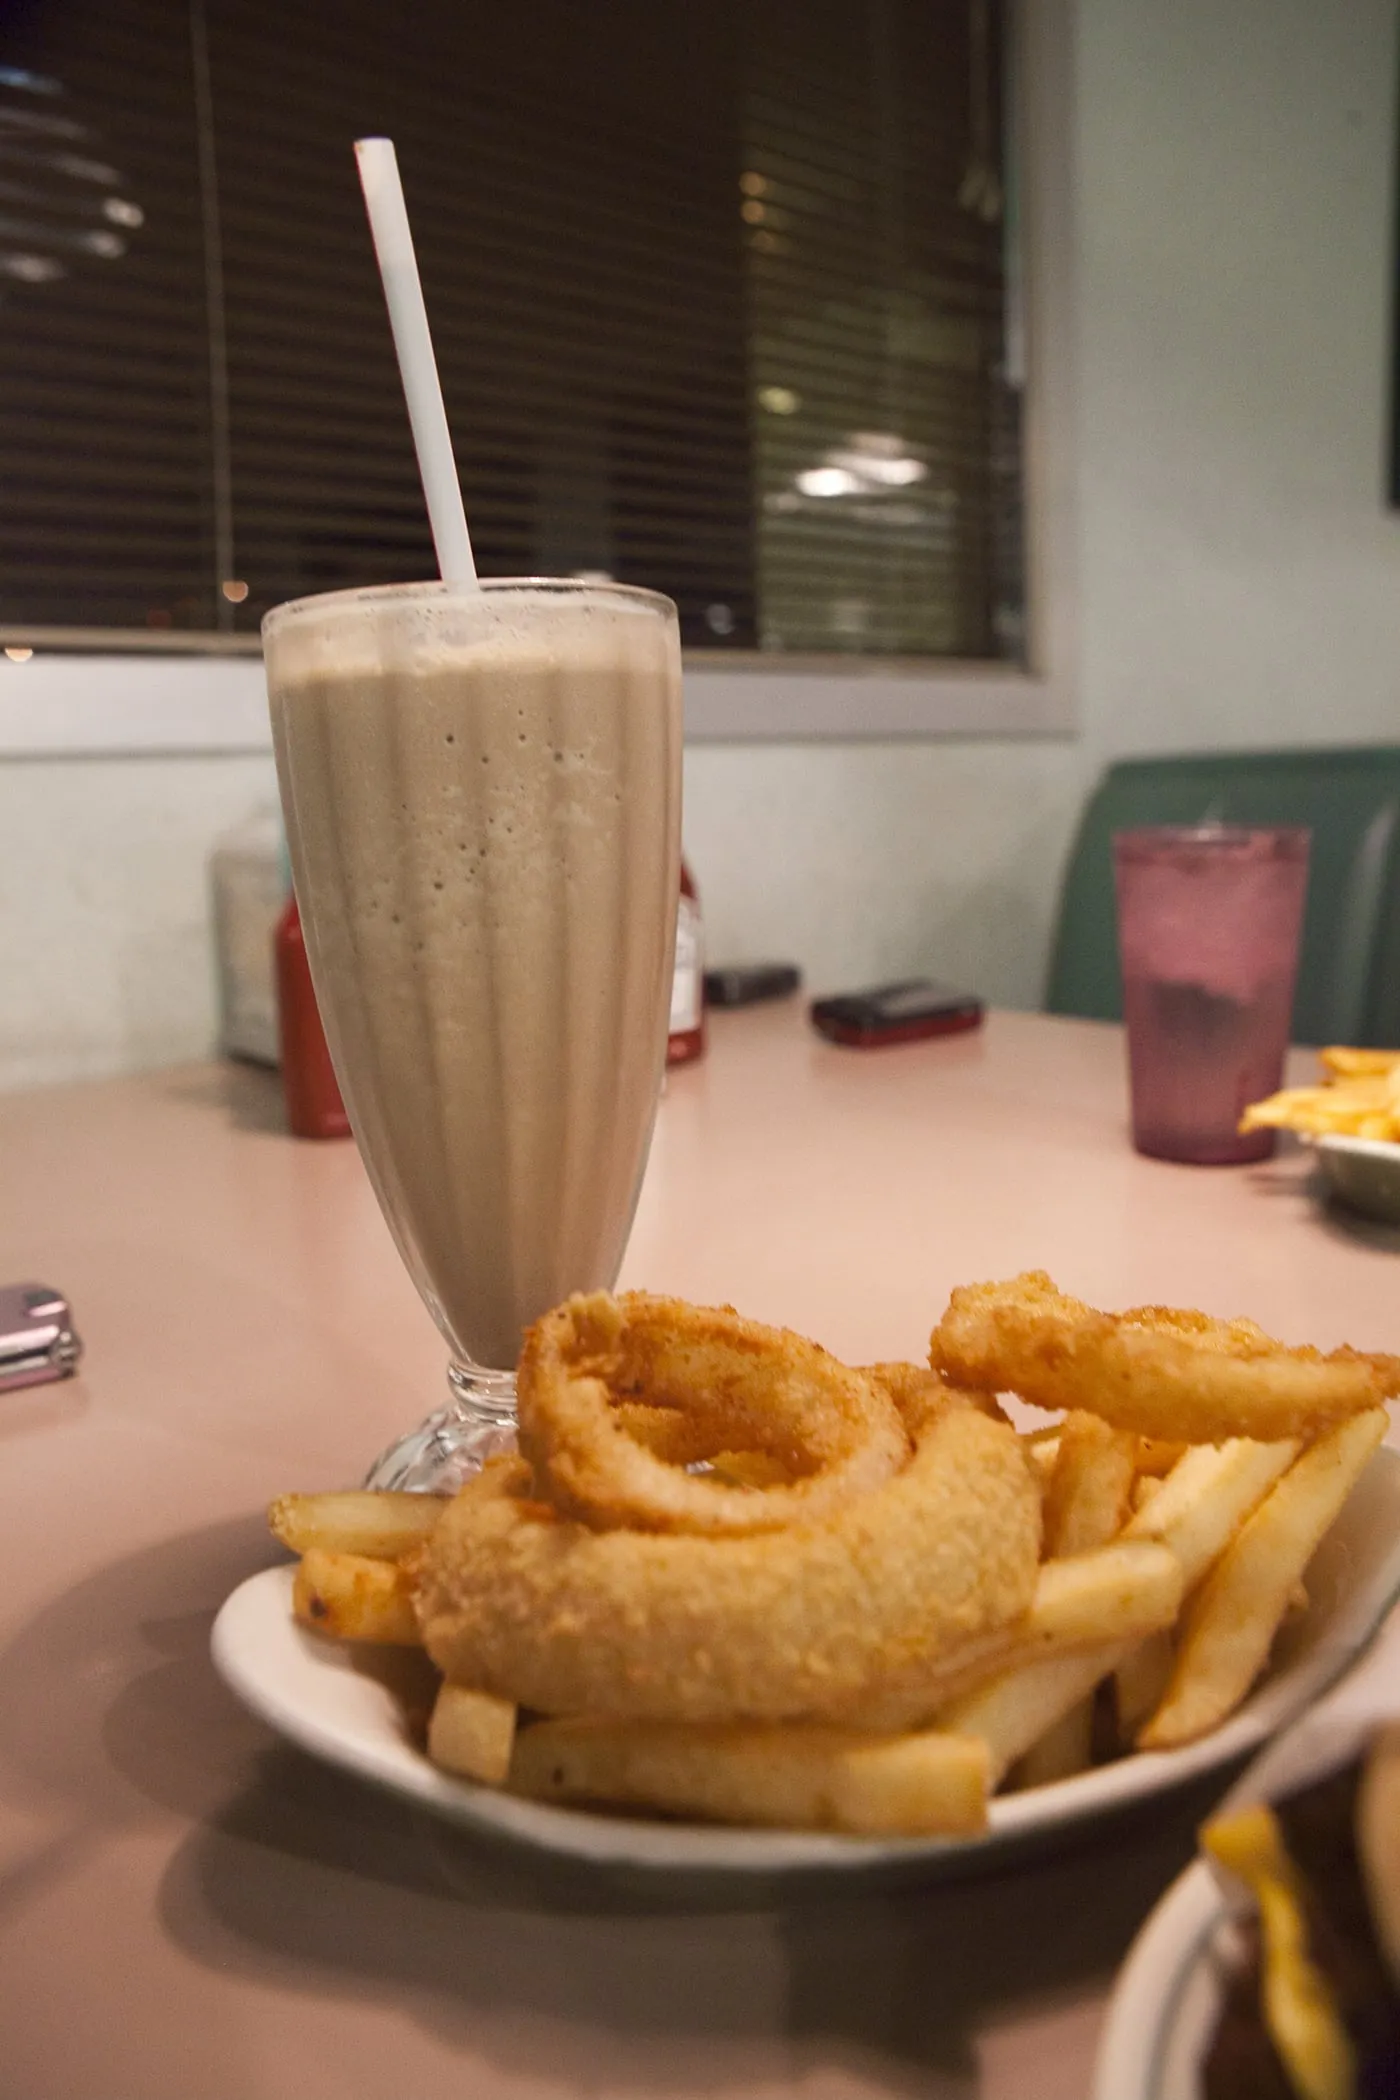 A 50/50 of fries and onion rings, and a chocolate milkshake at Winstead's in Overland Park, Kansas.